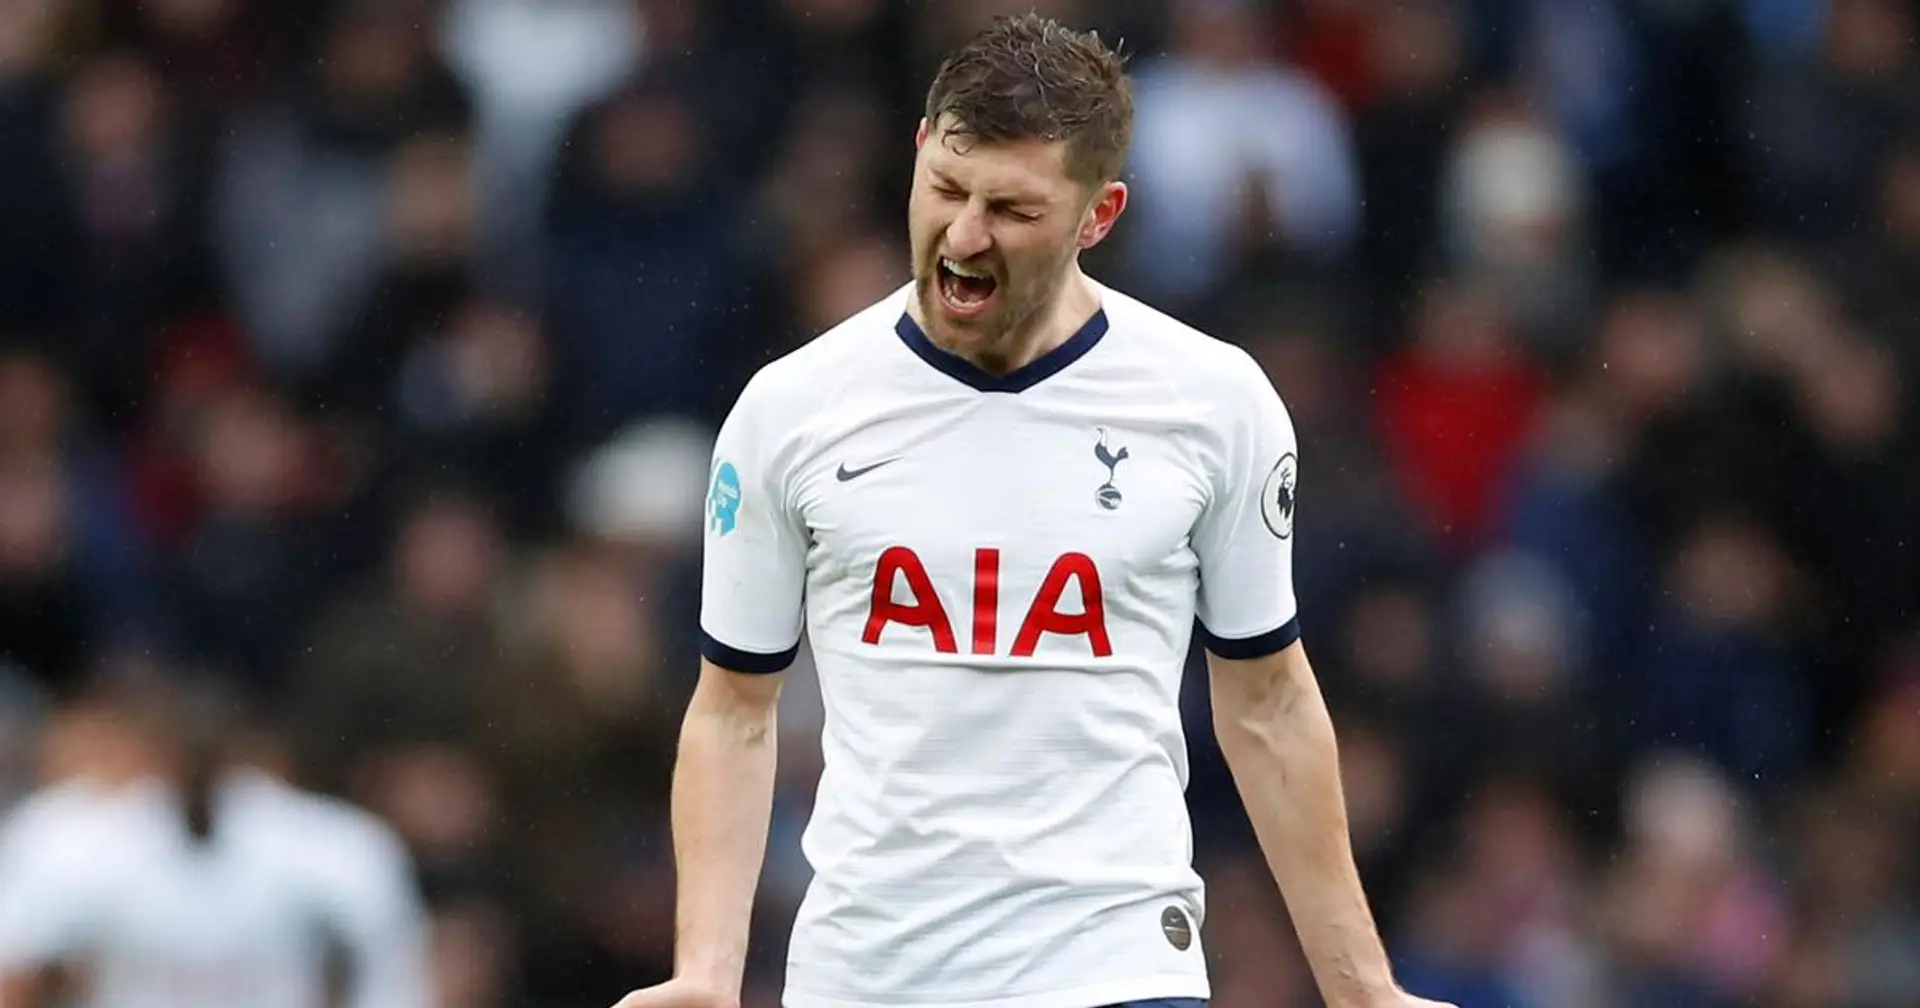 Spurs man Ben Davies understands Friday's clash means all or nothing: 'We know that this game is vital'